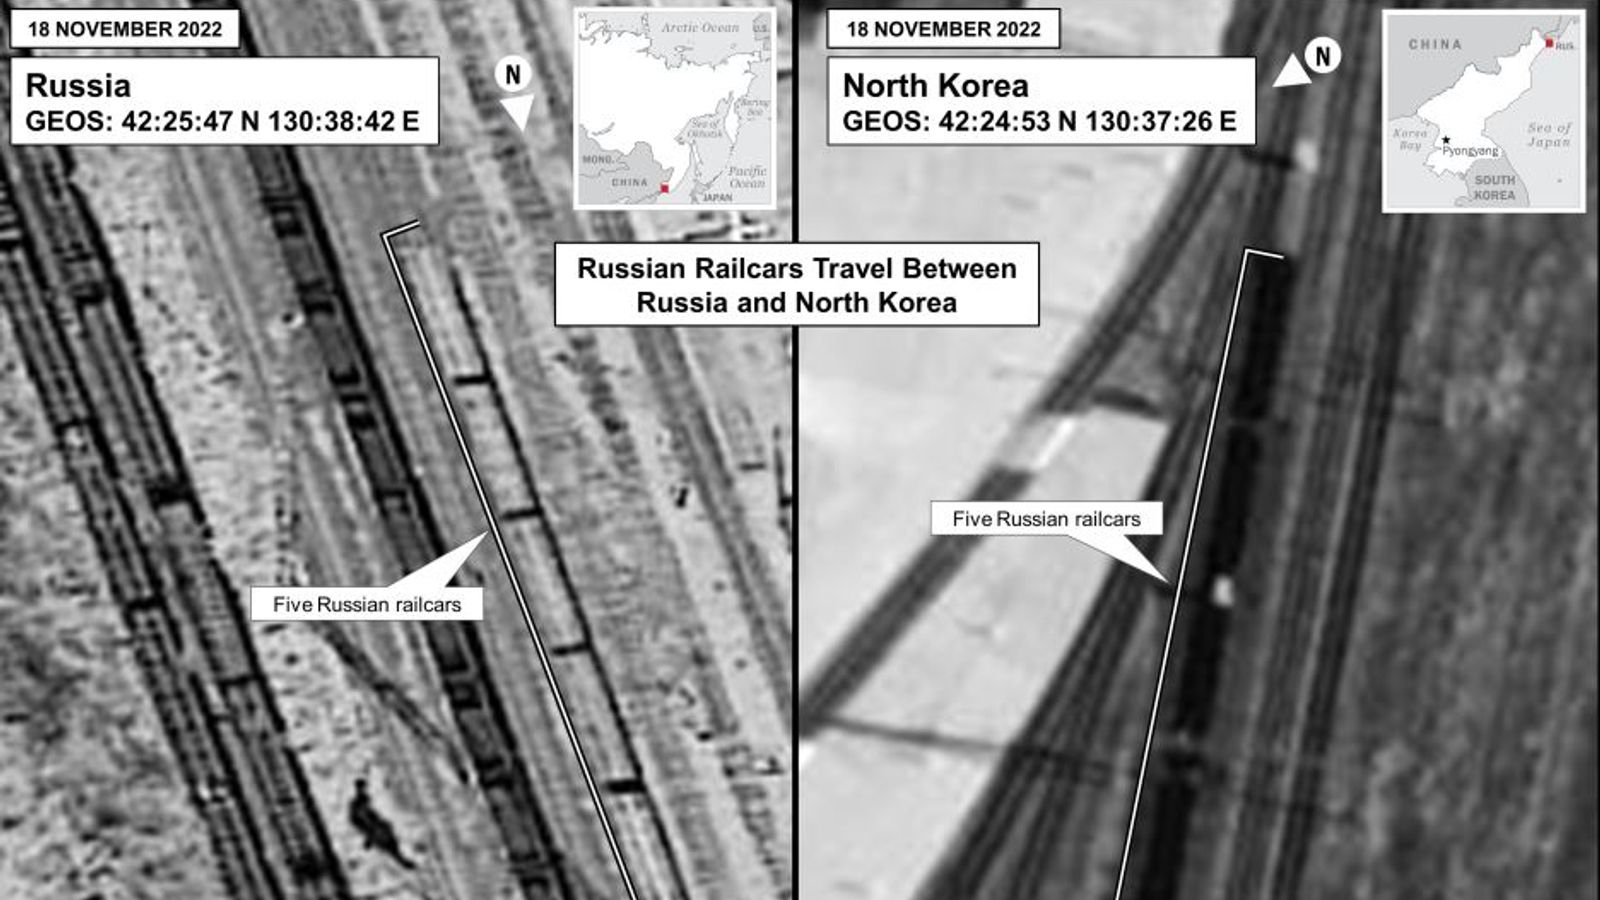 Ukraine war: Russian train collected weapons from North Korea for Wagner mercenaries, US says